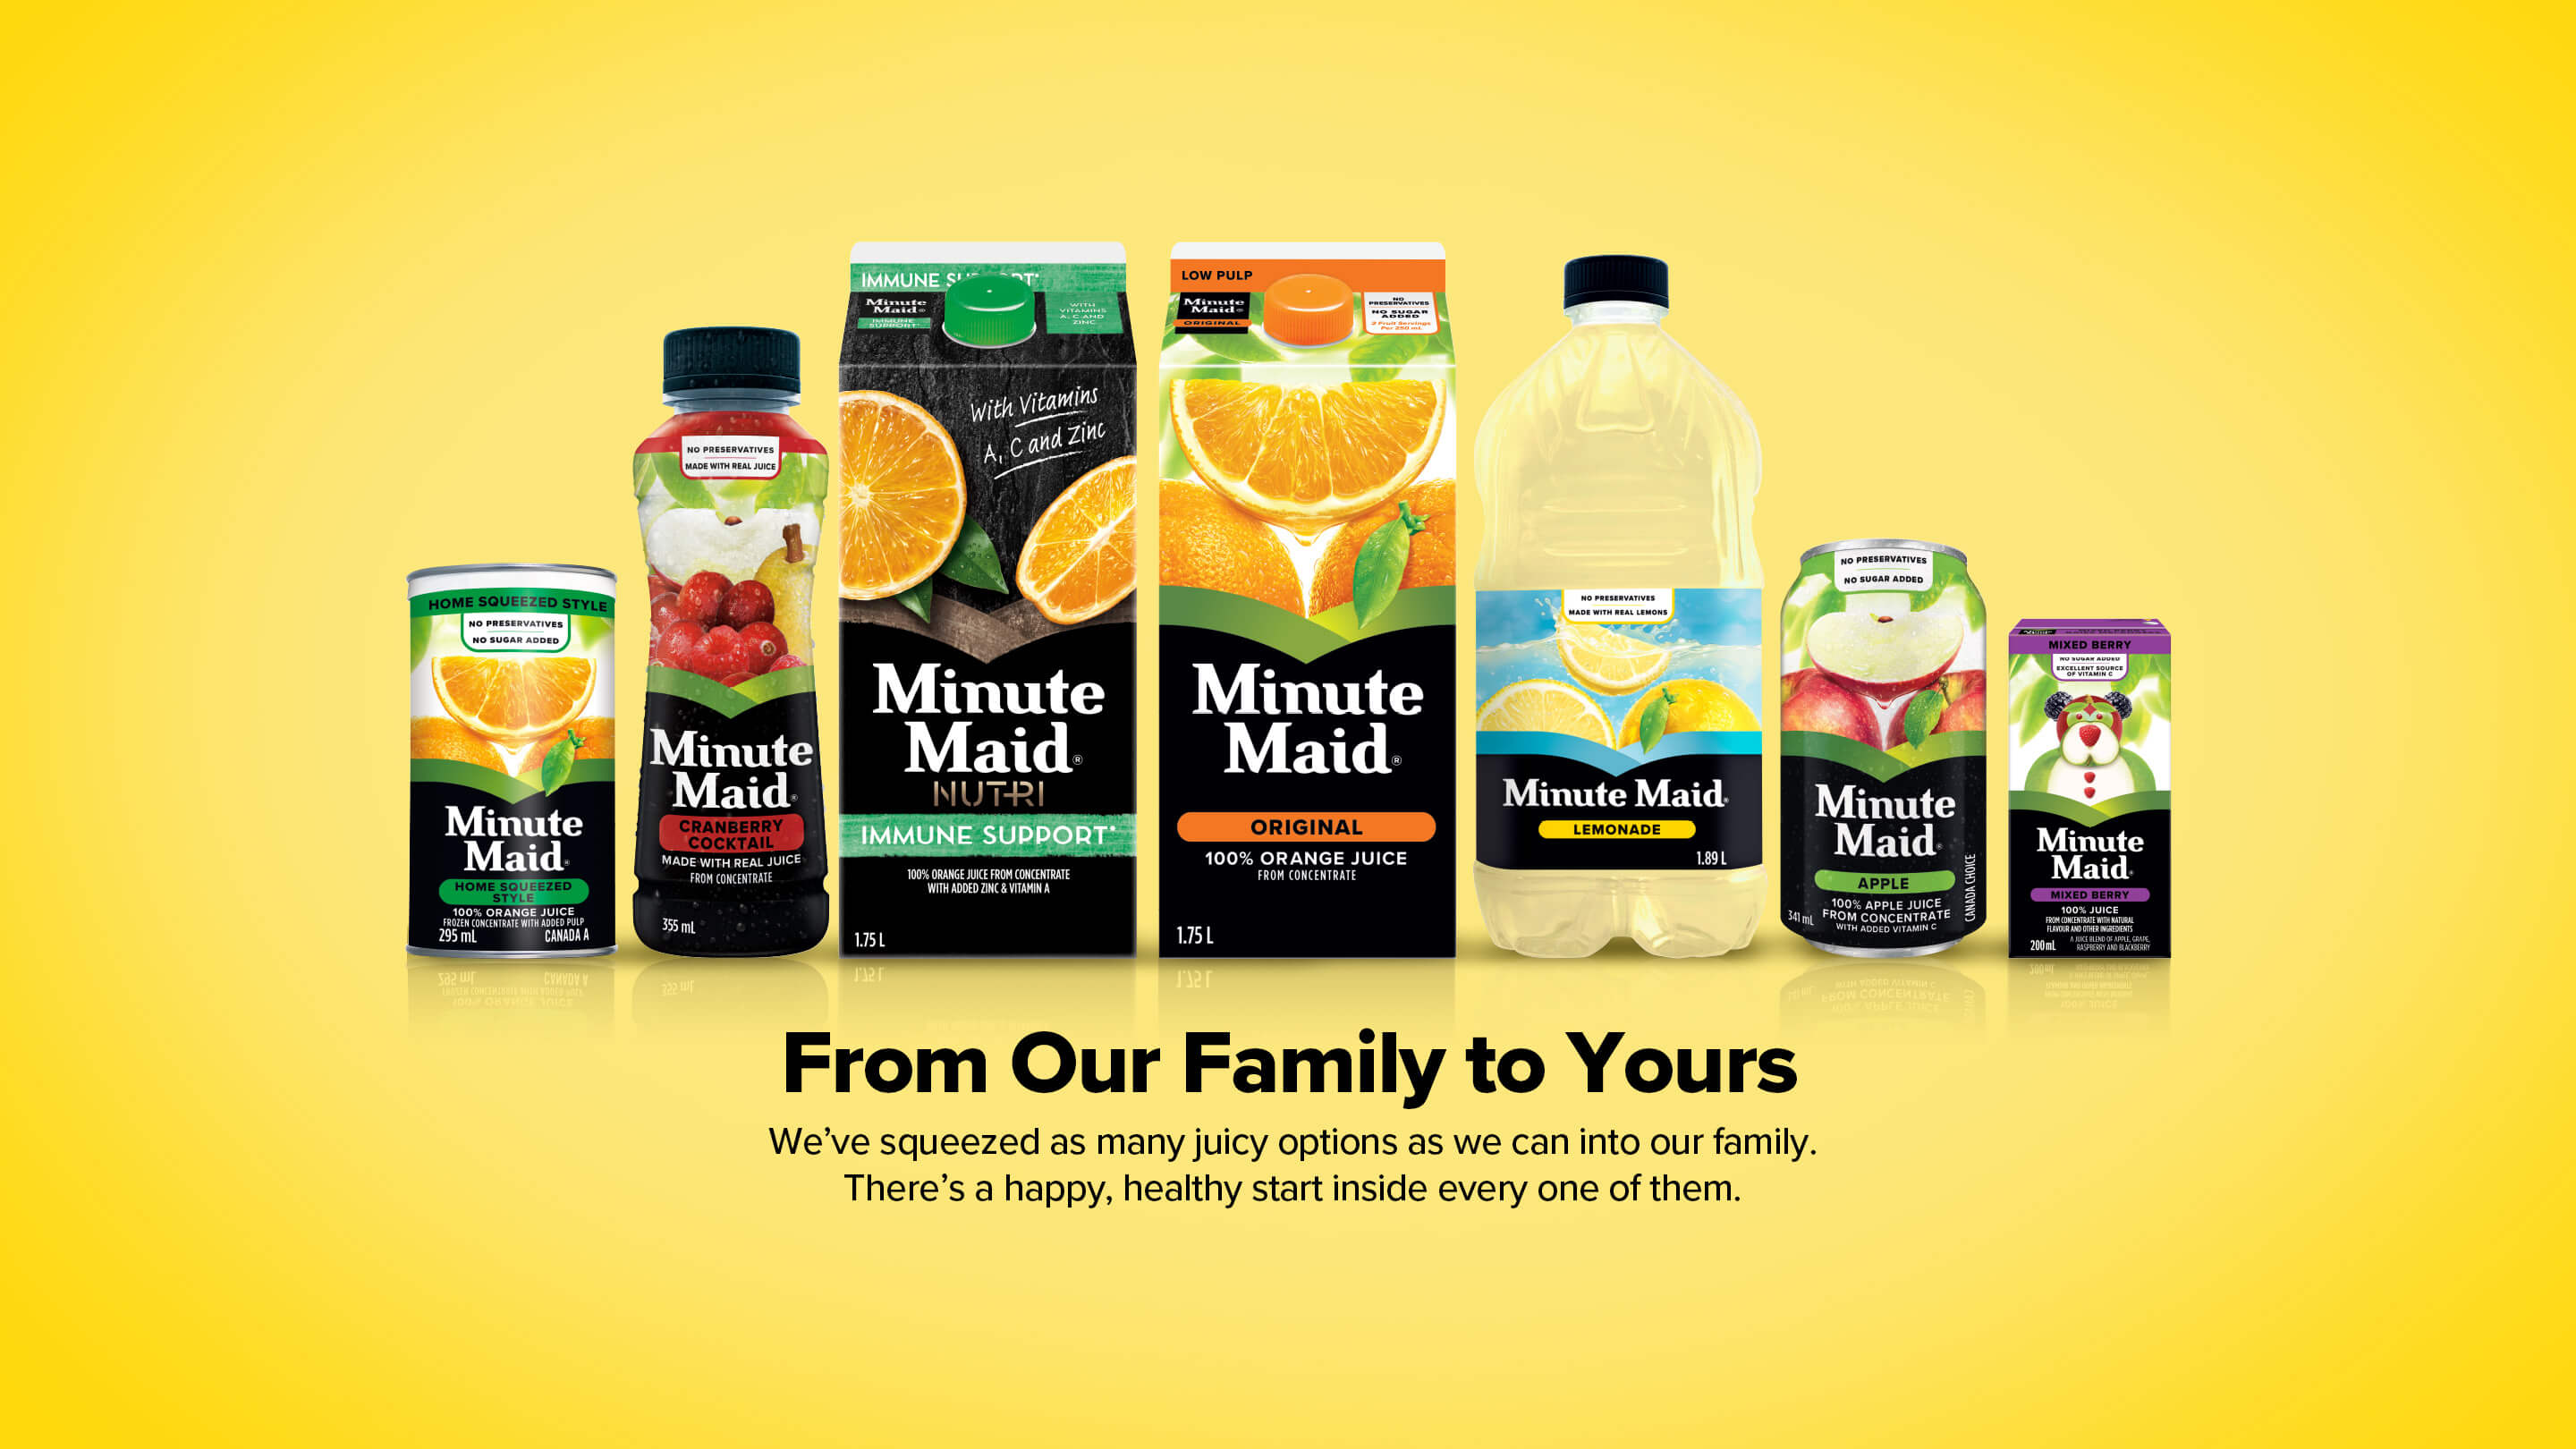 Minute Maid. From Our Family to Yours. We've squeezed as many juicy options as we can into our family. There's a happy, healthy start inside every one of them.